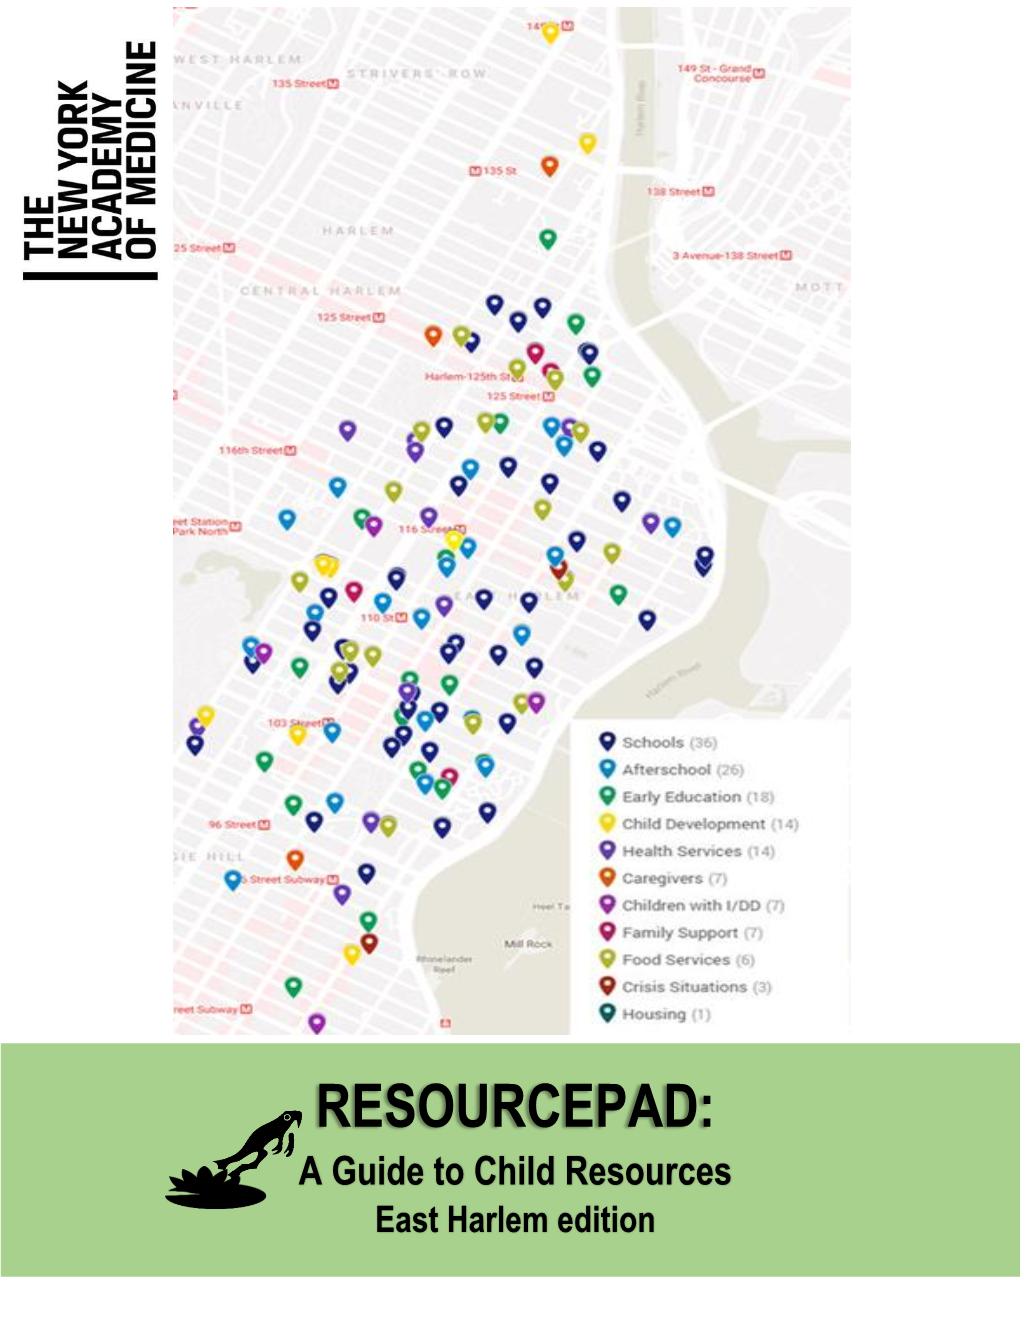 RESOURCEPAD: a Guide to Child Resources, East Harlem Edition